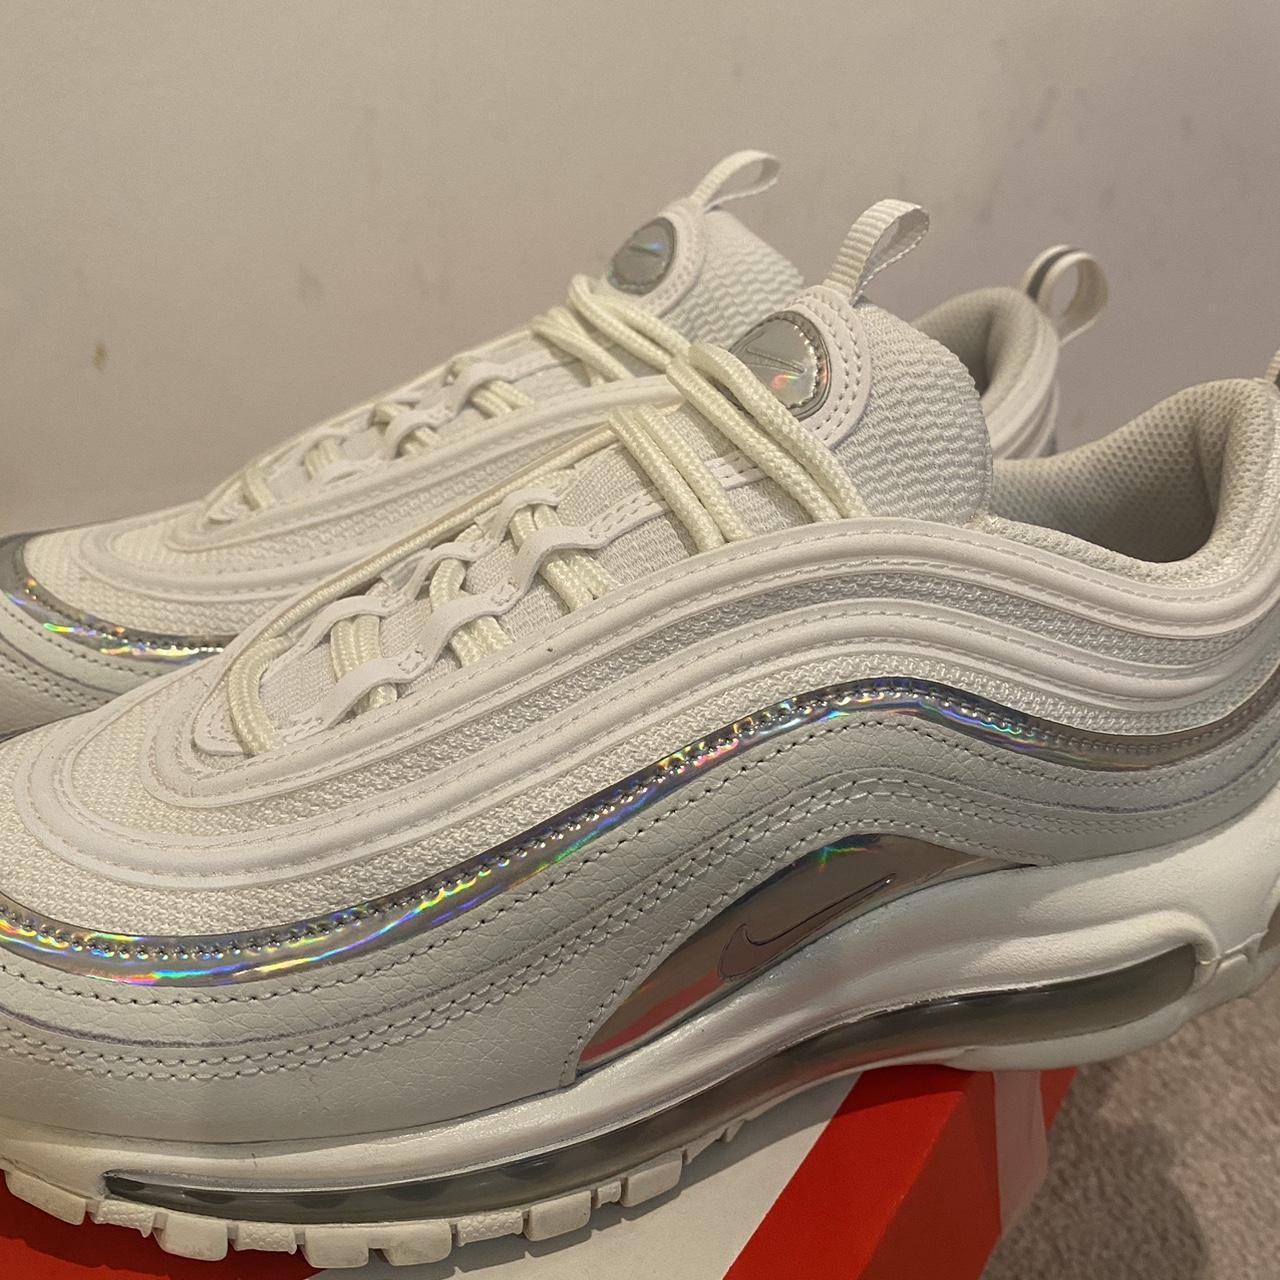 Nike air 97s limited edition Size 5.5 Limited... - Depop